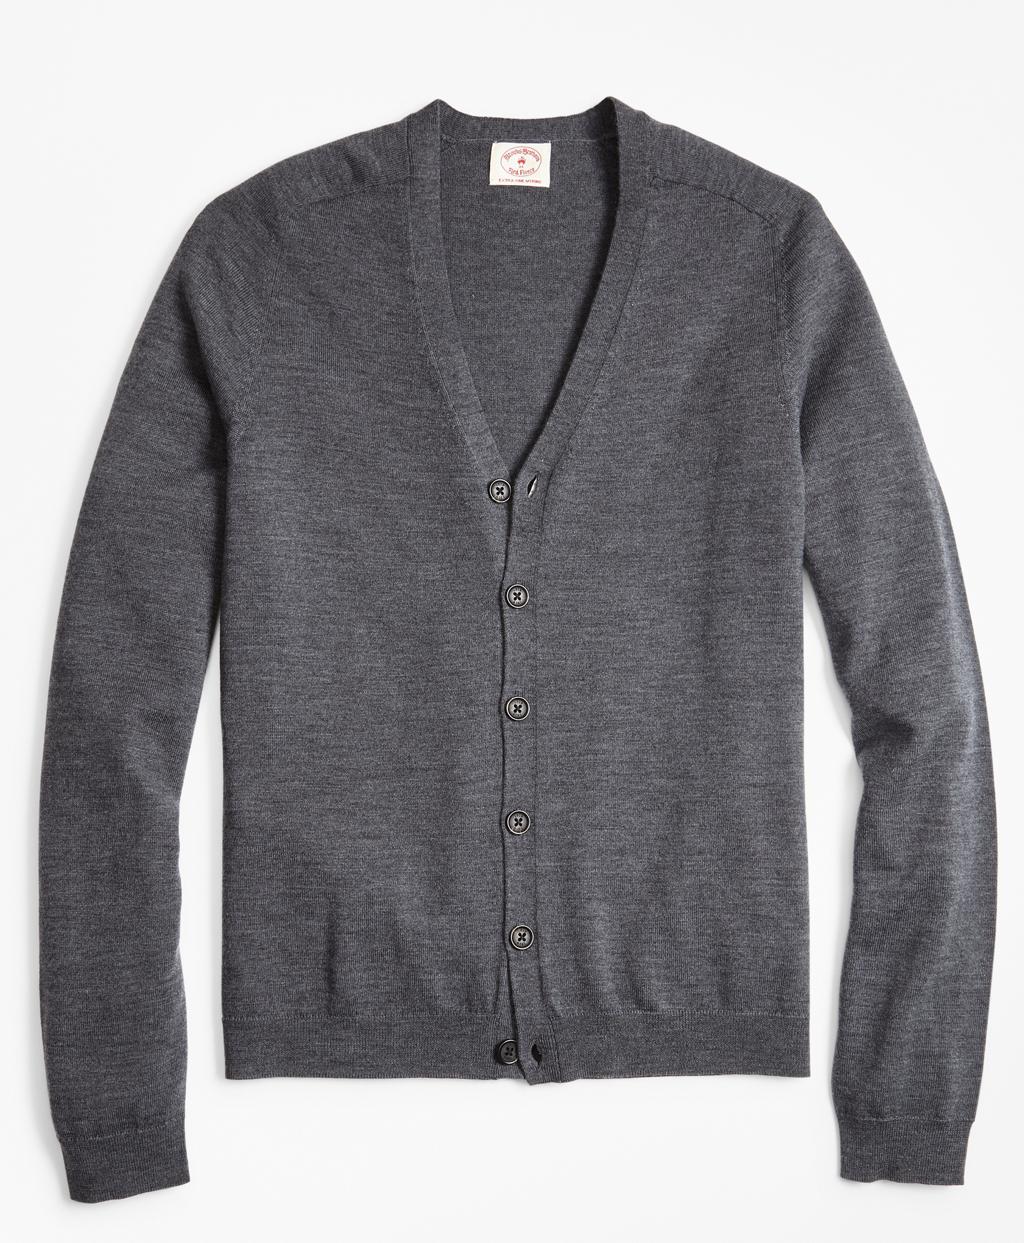 Brooks Brothers Merino Wool V-neck Cardigan in Charcoal (Gray) for Men